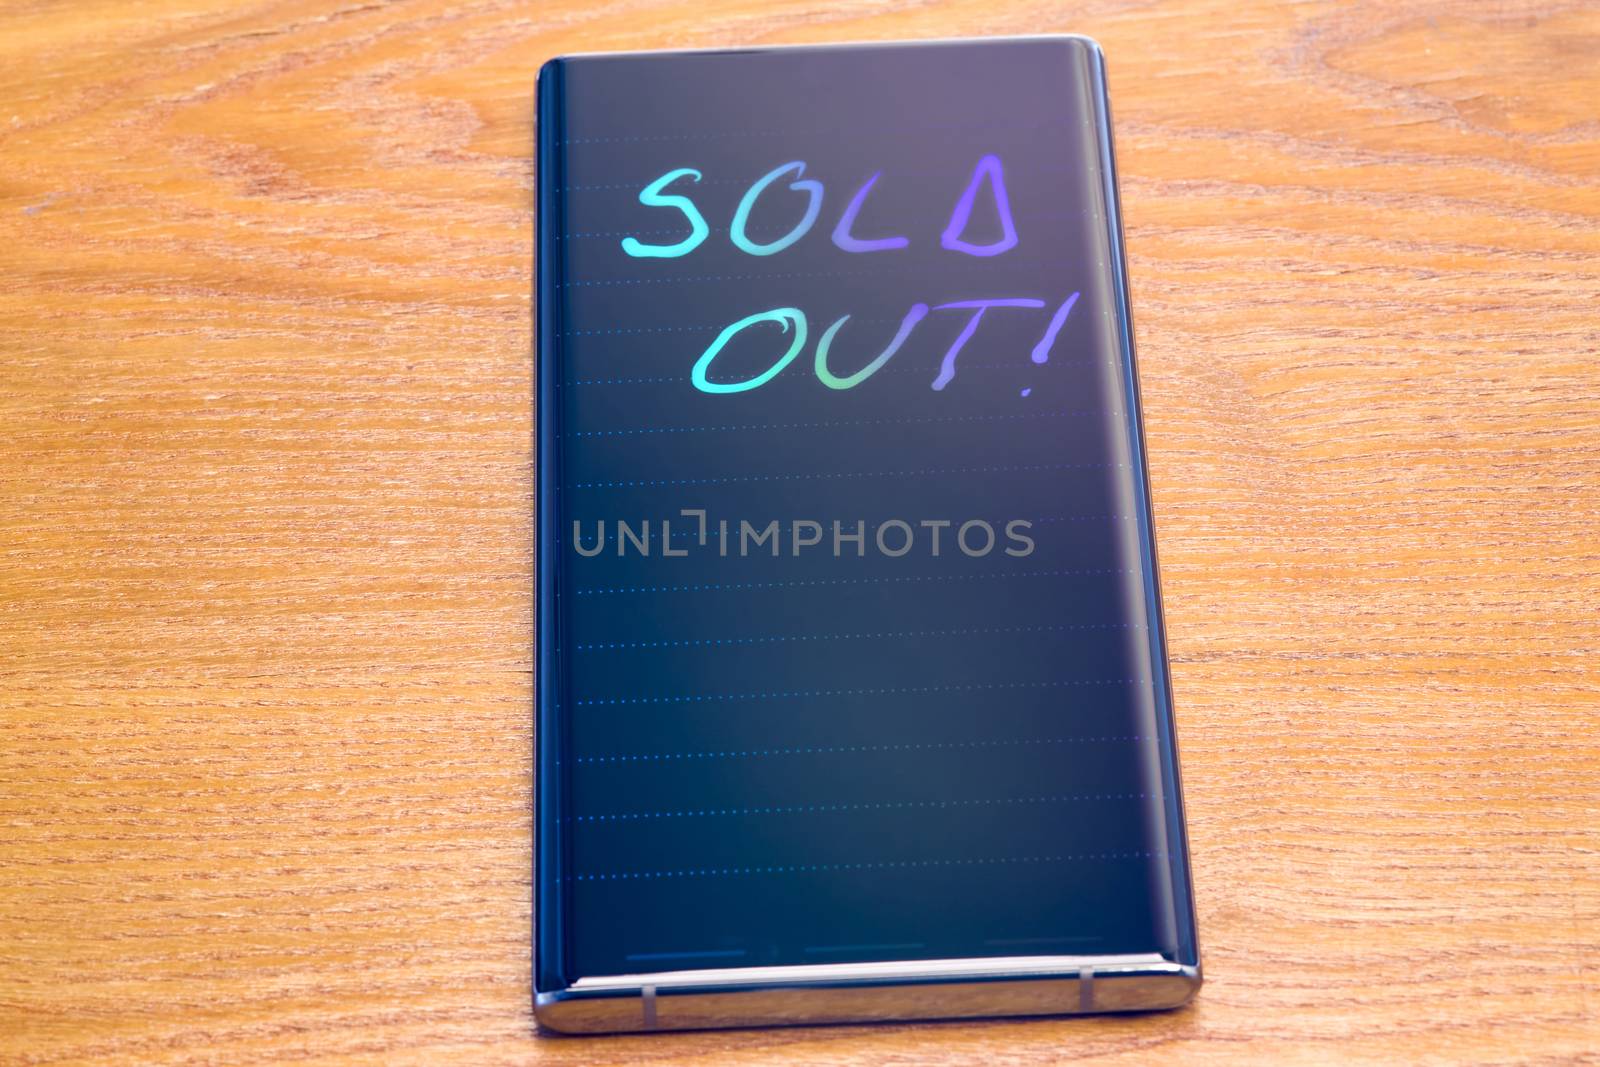 Sold out on mobile display by savcoco